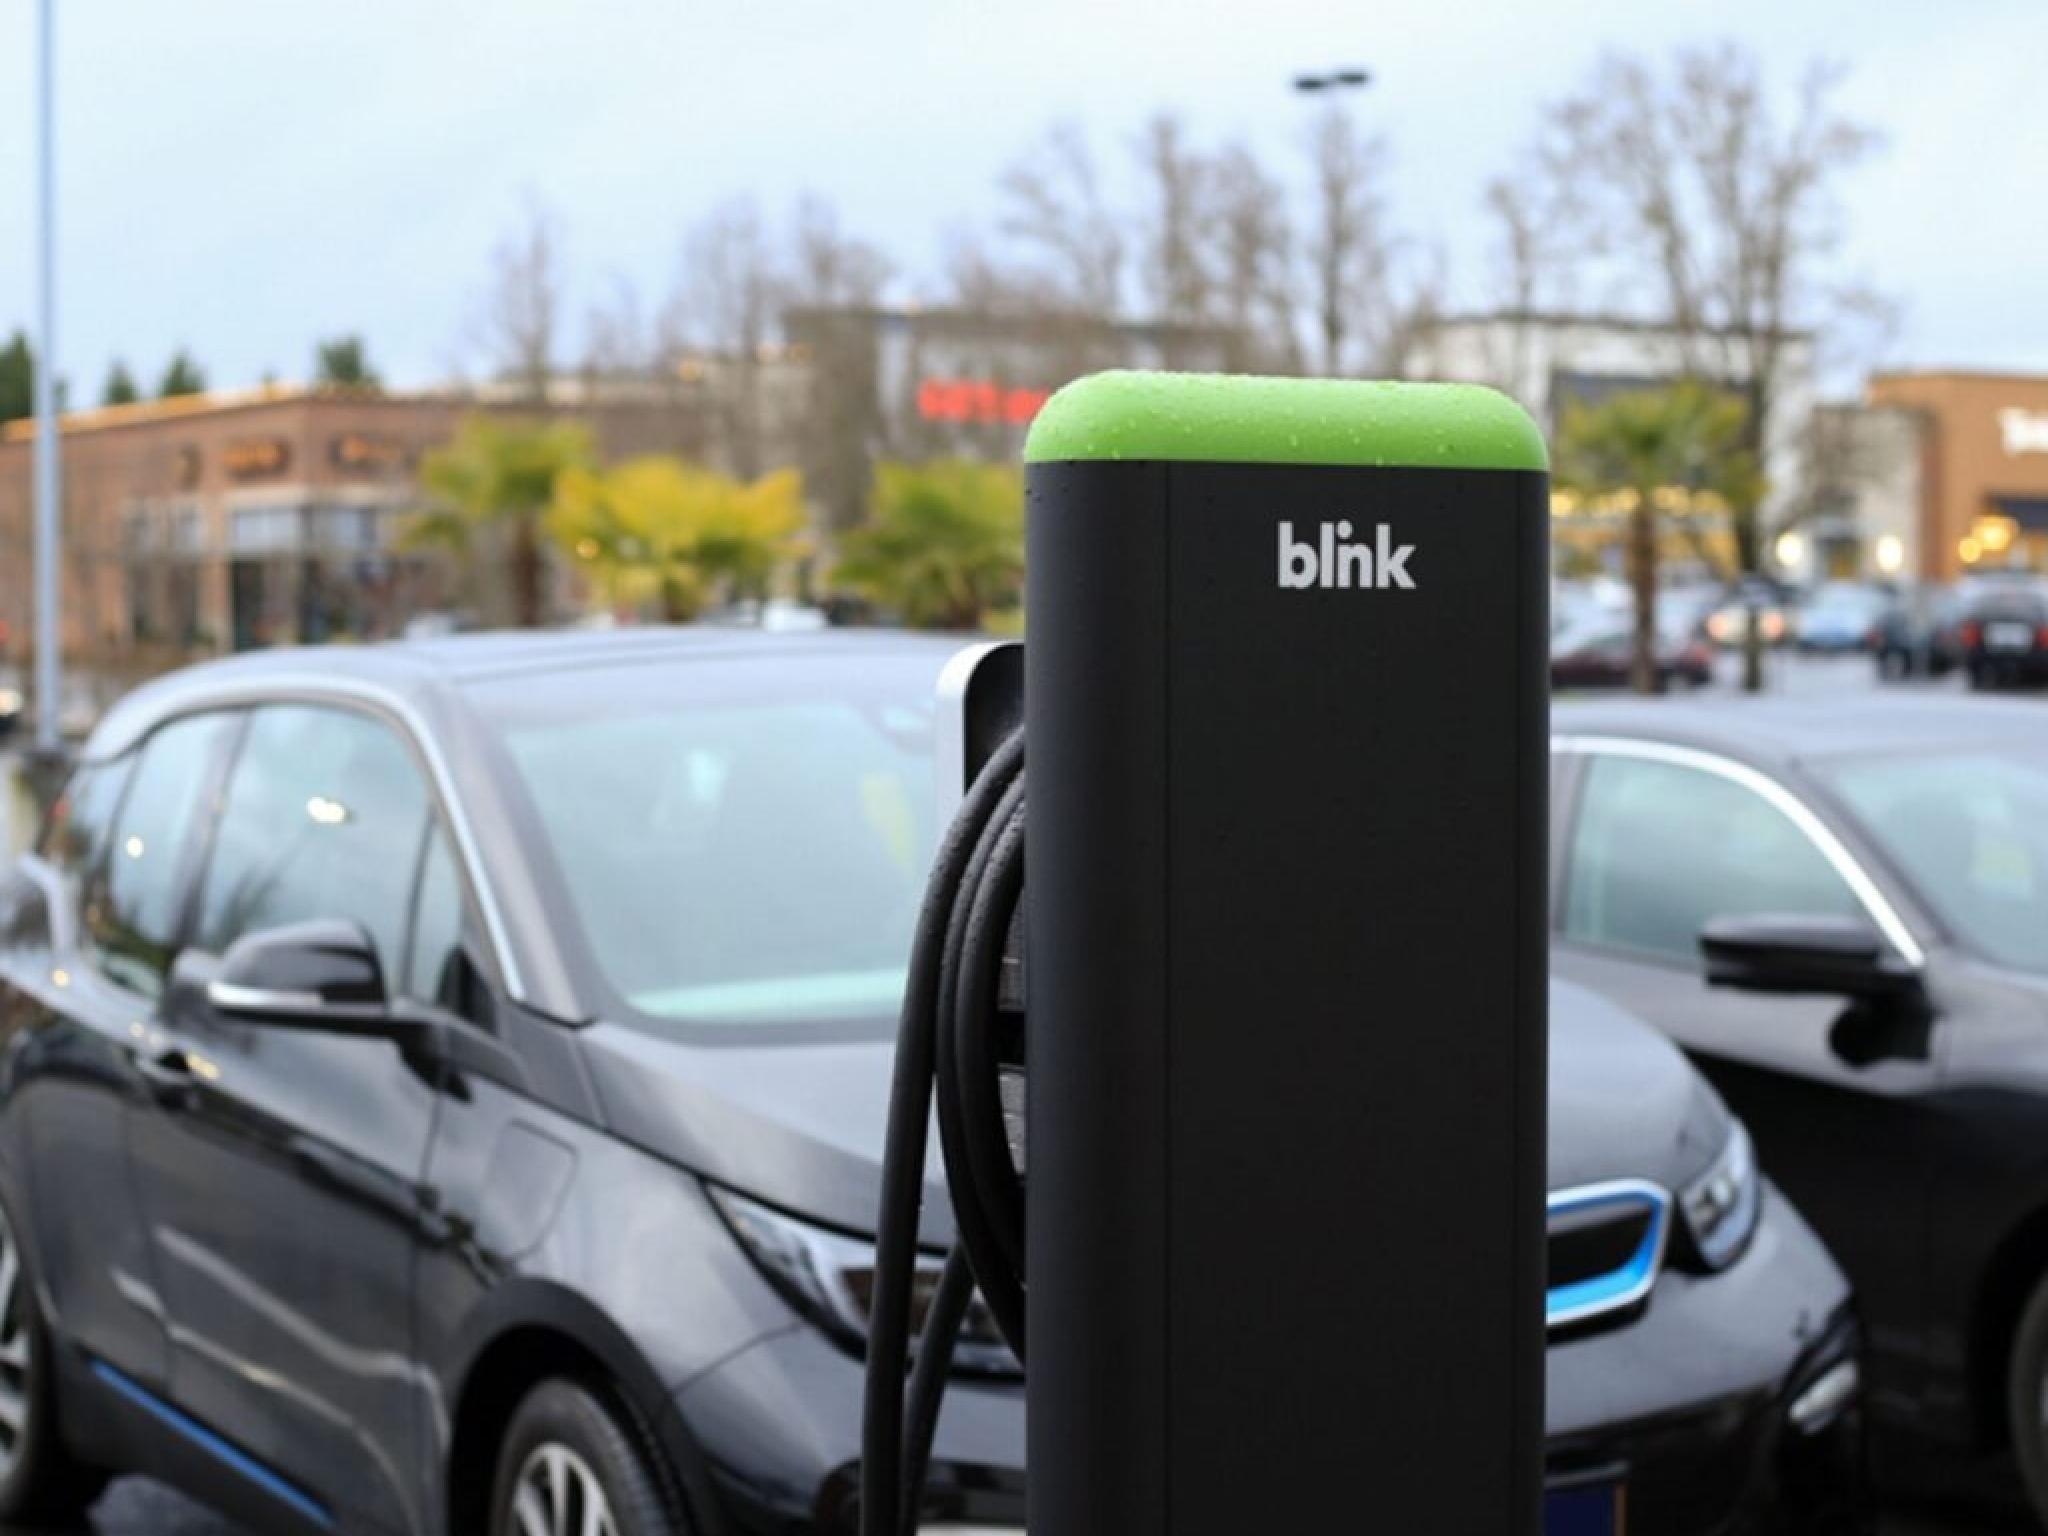  blink-charging-secures-exclusive-deal-with-keystone-purchasing-network-for-ev-charging-services-aiding-education-sector-nationwide 